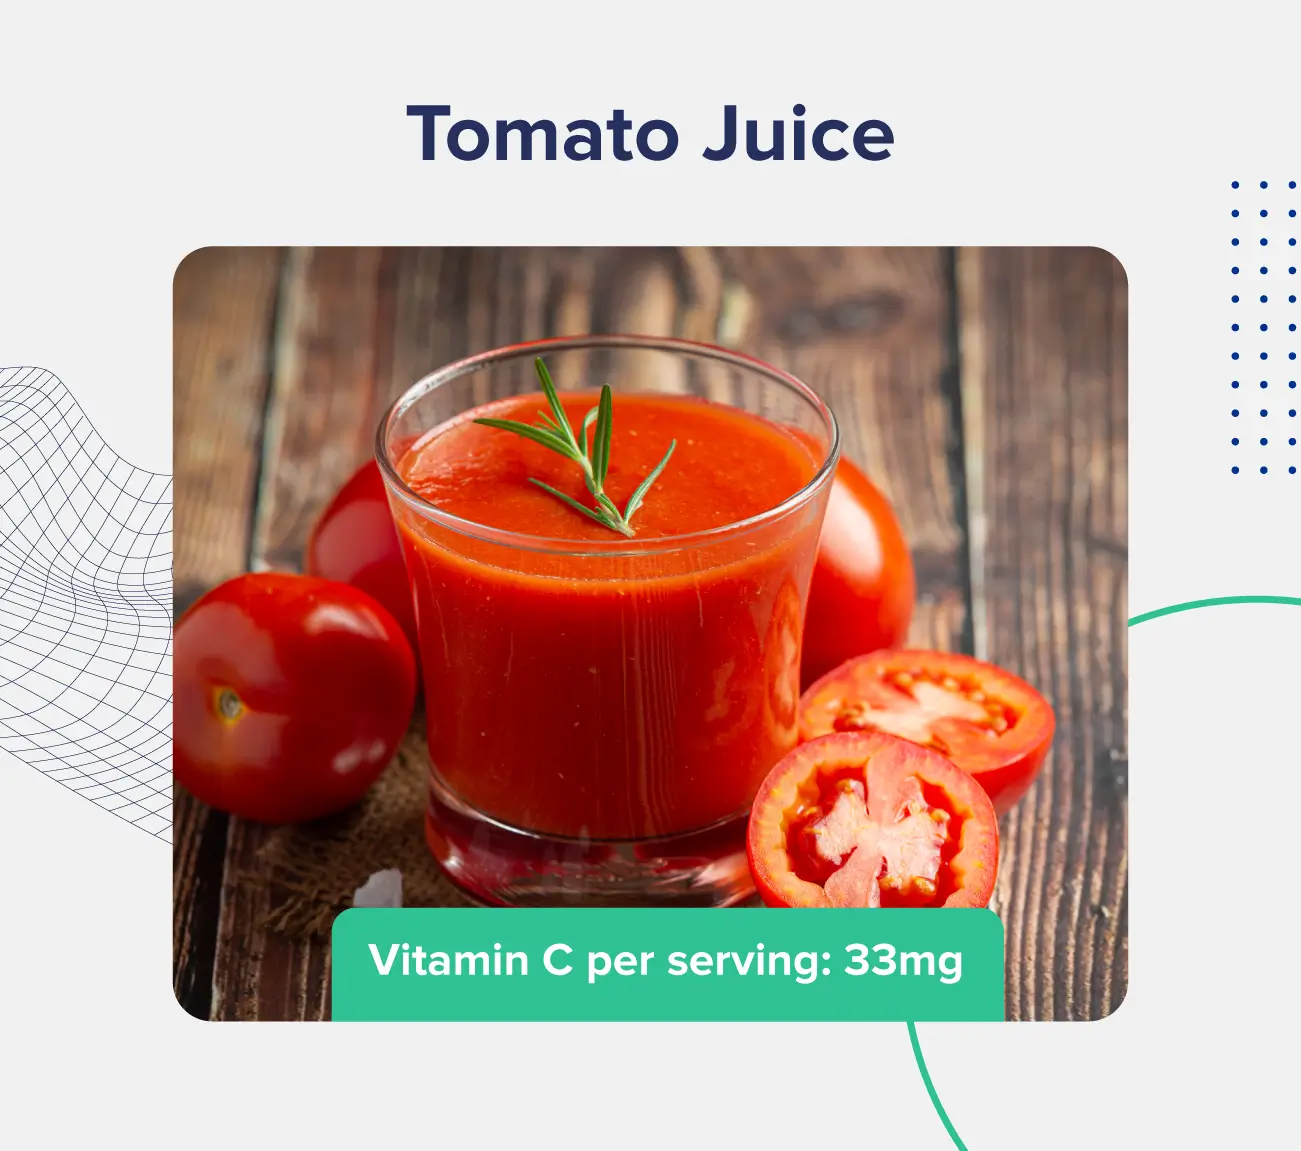 A graphic entitled "tomato juice" depicting a glass of tomato juice garnished with a thyme leaf and surrounded by cut and whole tomatoes, along with a description of the vitamin C content (33 milligrams per serving) 